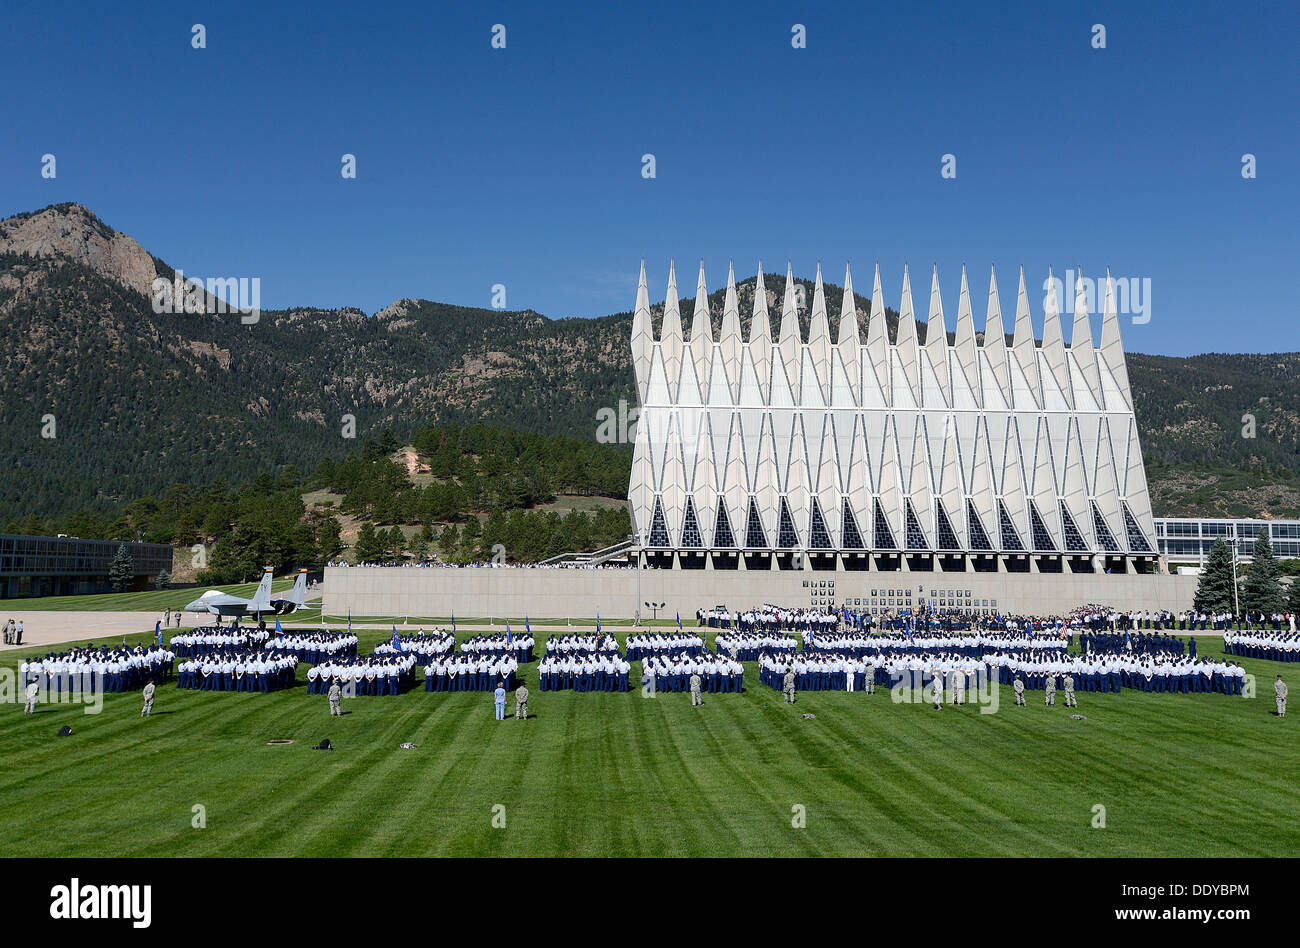 The U.S. Air Force Academy Cadet Wing stands in formation on the parade ground during change of command ceremony August 12, 2013 in Colorado Springs, CO. Stock Photo